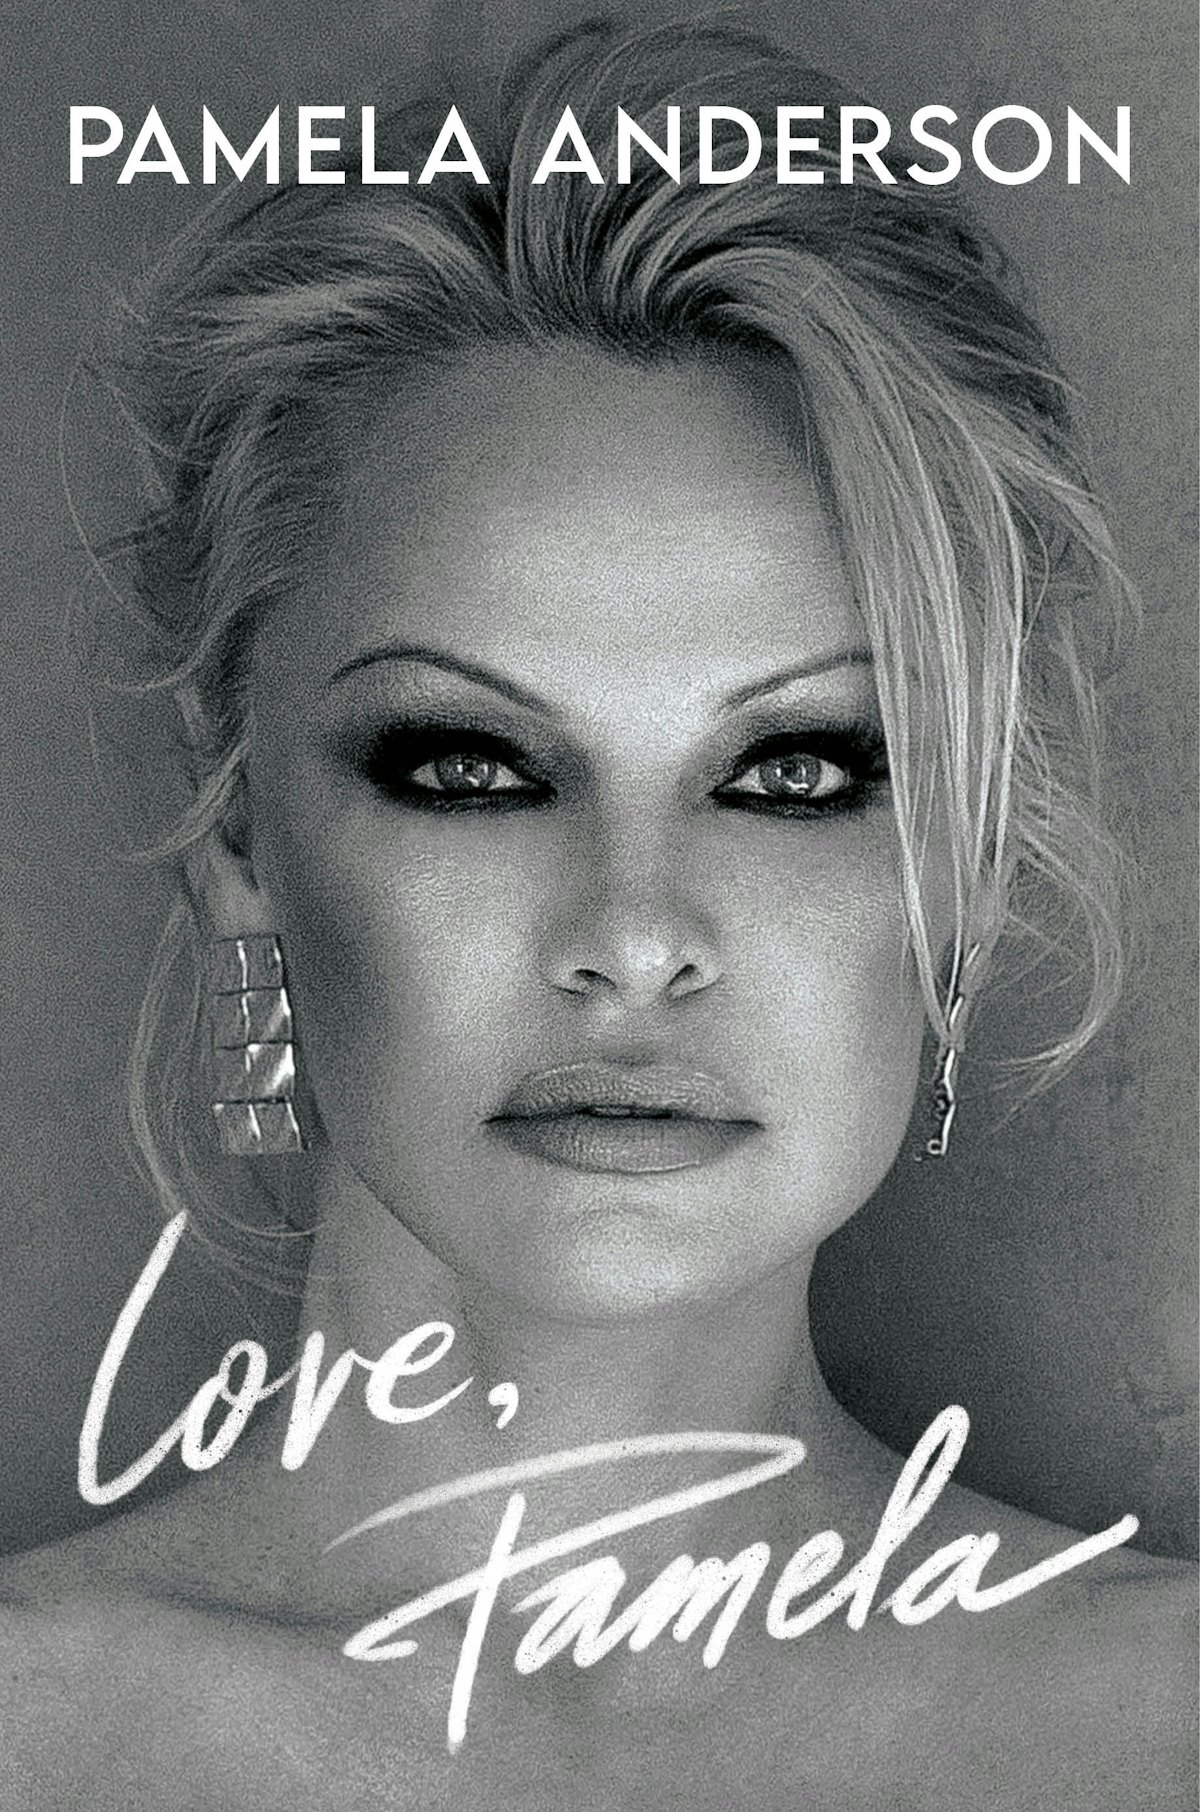 Here are Pamela Anderson's most iconic makeup looks & hairstyles.